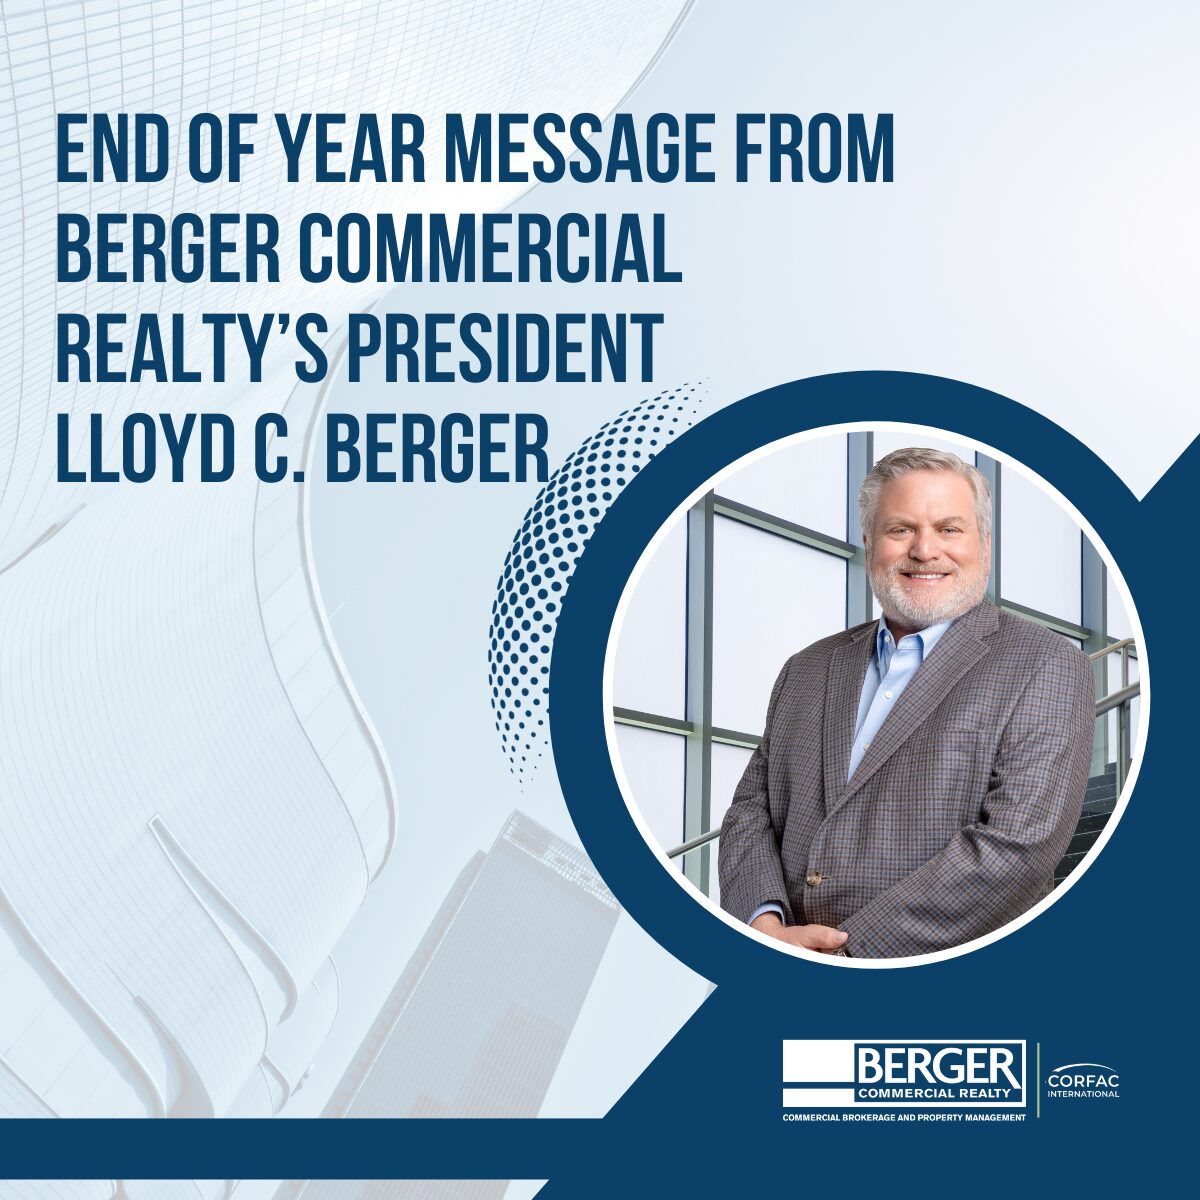 End Of Year Message From Berger Commercial Realty’s President, Lloyd C. Berger